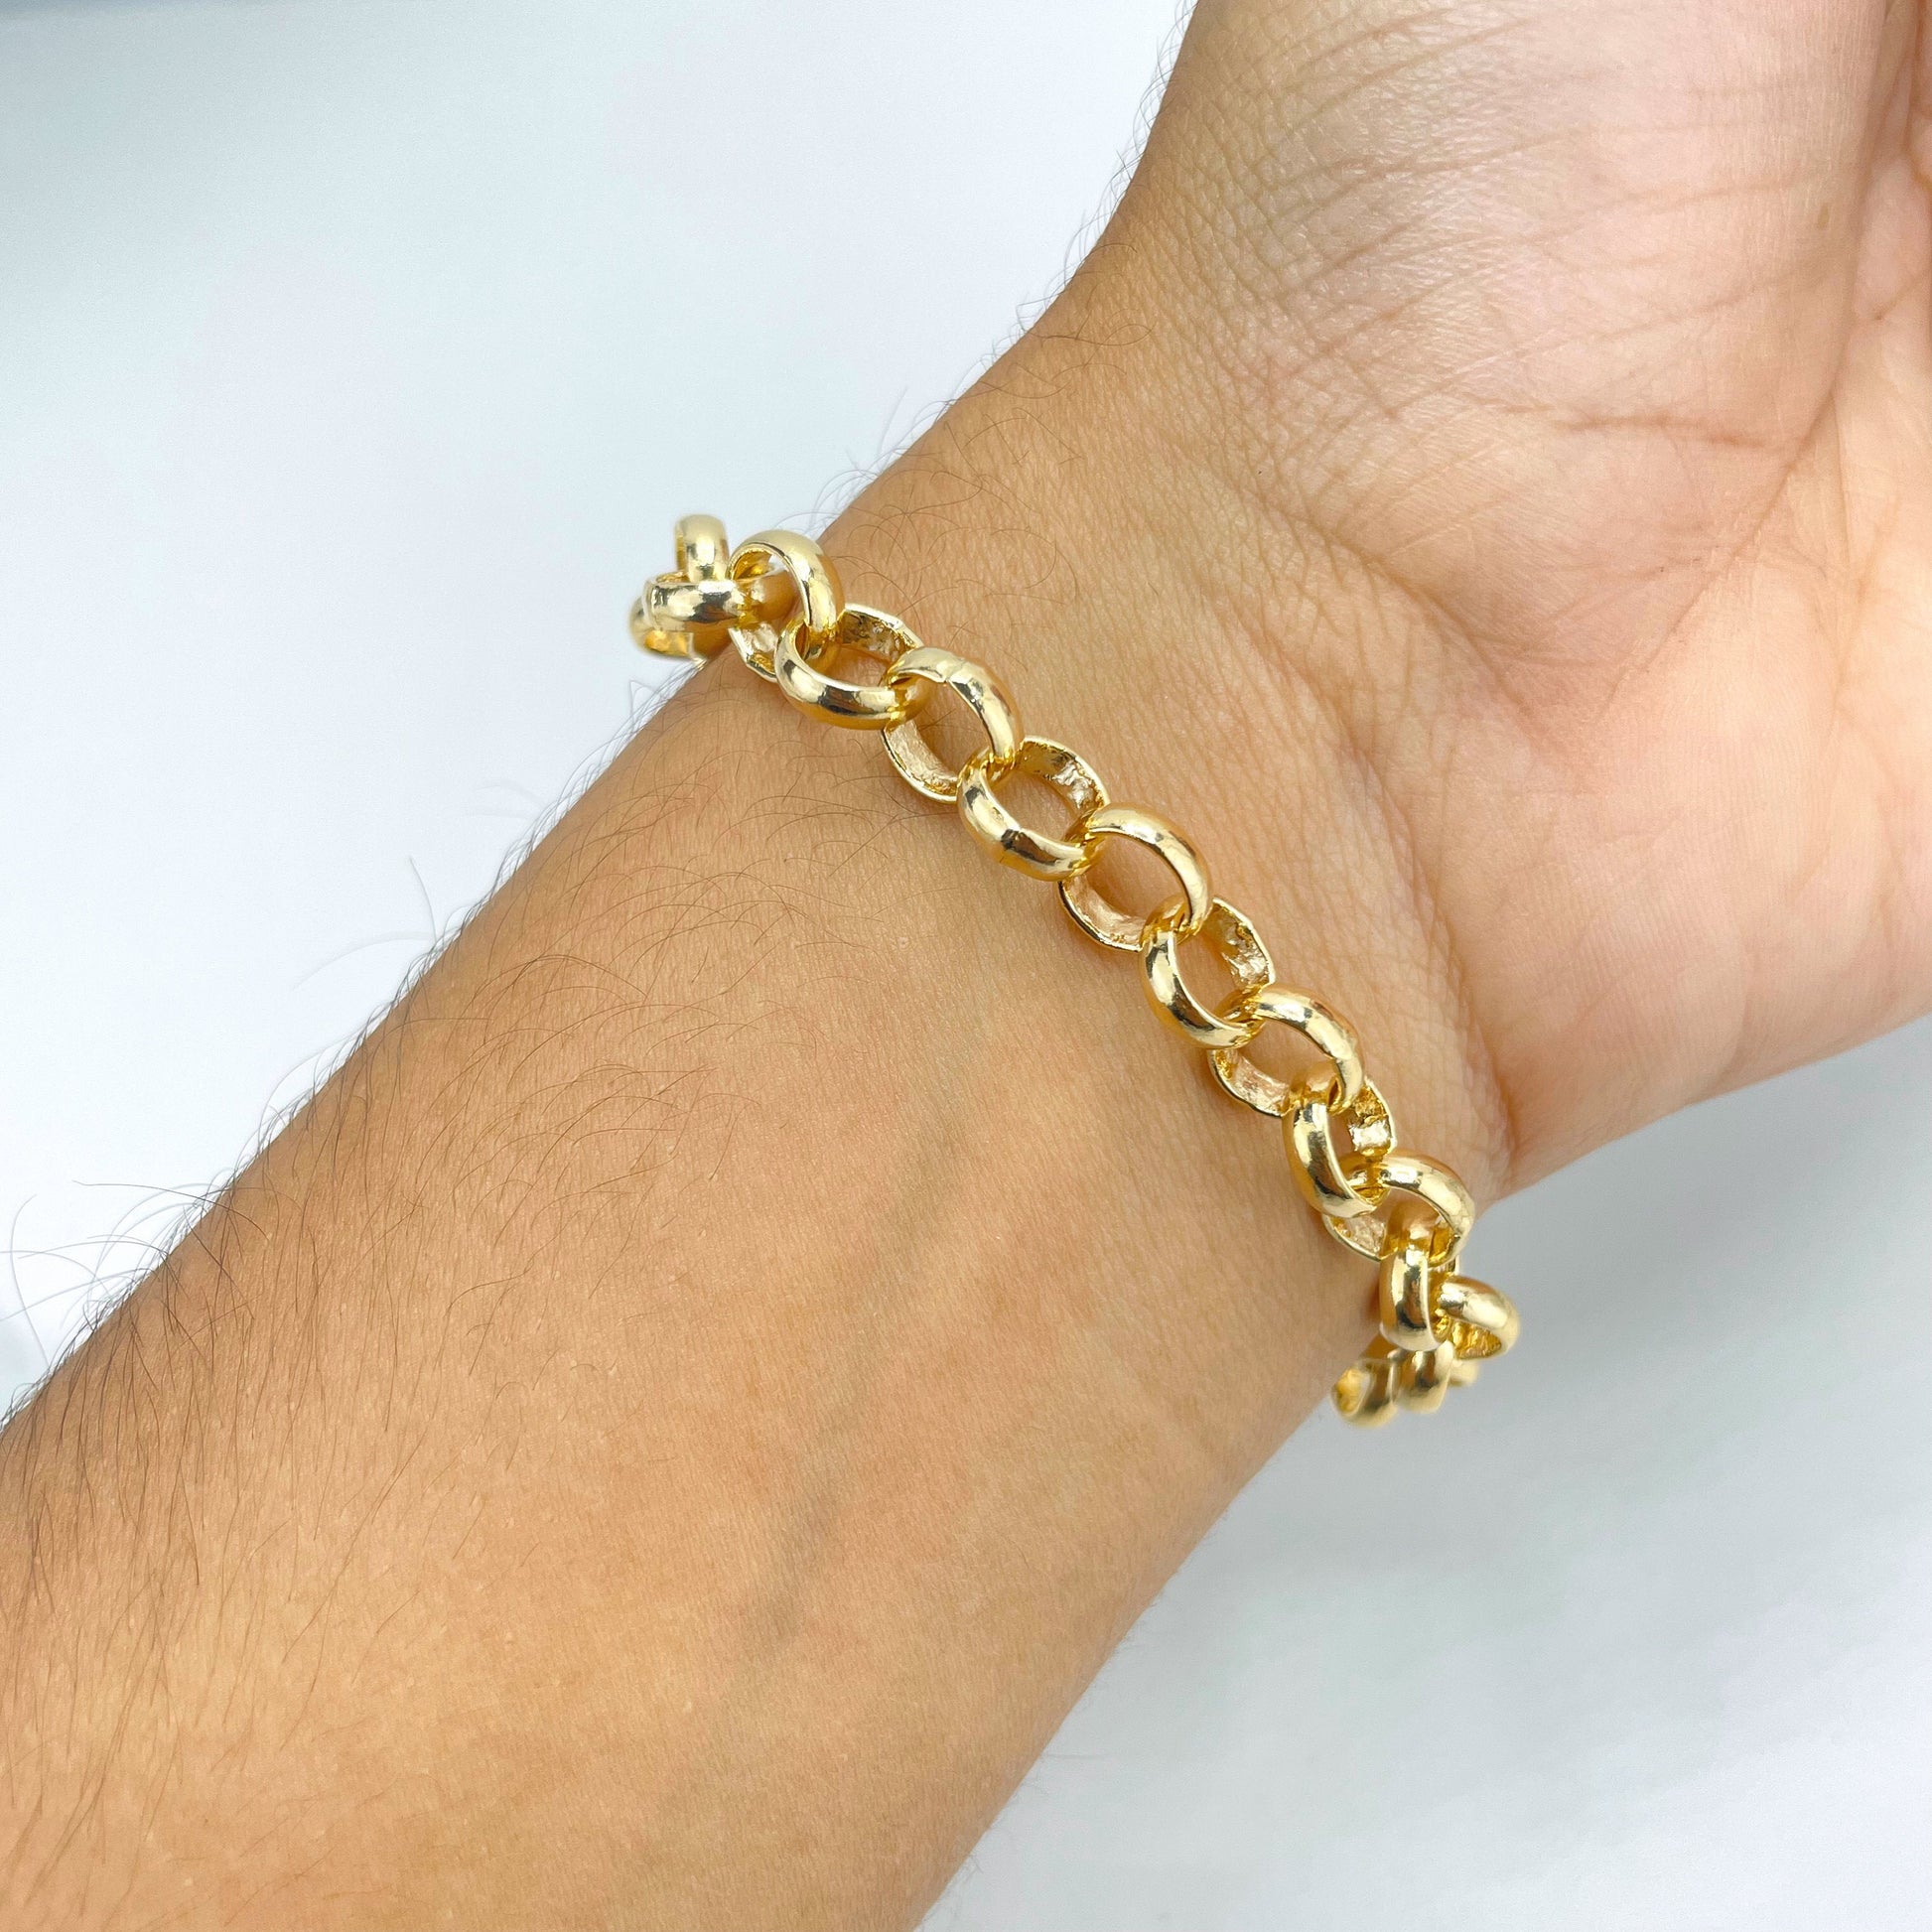 18k Gold Filled 2mm Rolo Chain or Bracelet with Extender, Wholesale Jewelry Making Supplies